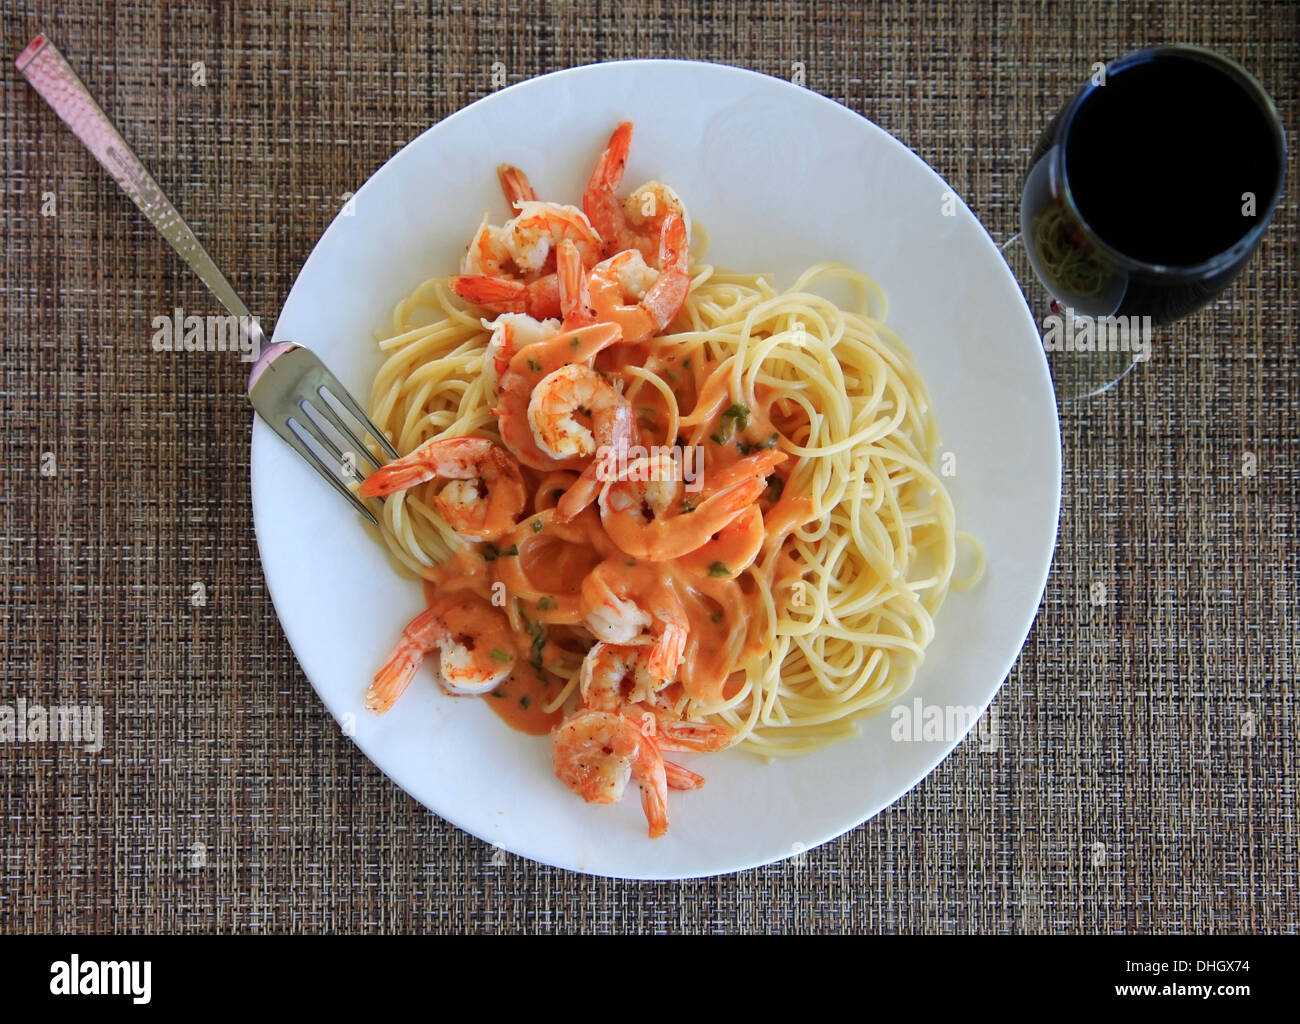 Spaghetti with shrimp and red souse Stock Photo